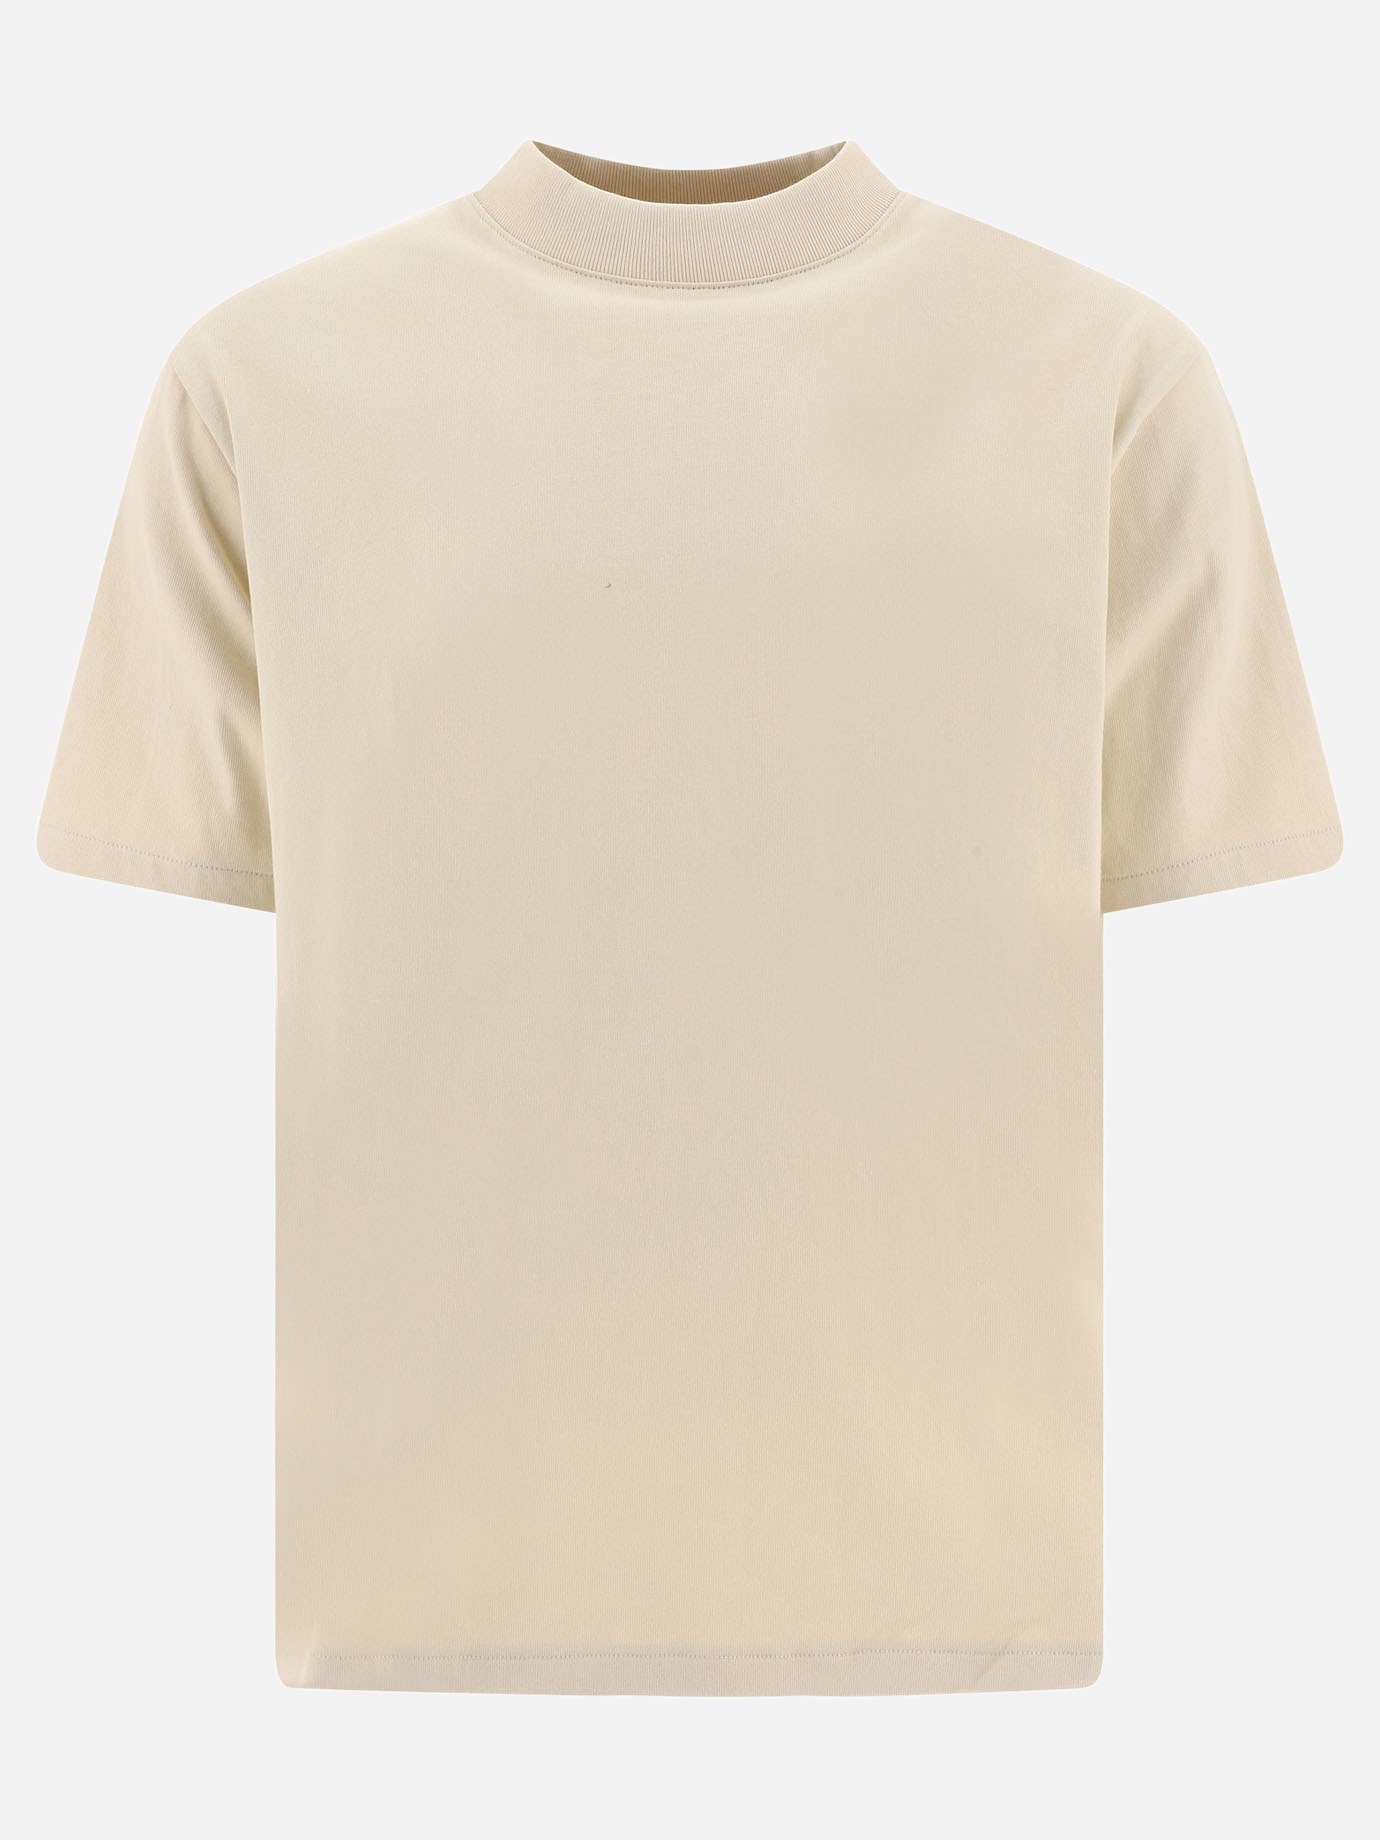  Mezzo Collo  t-shirtby Levi's Made & Crafted - 0